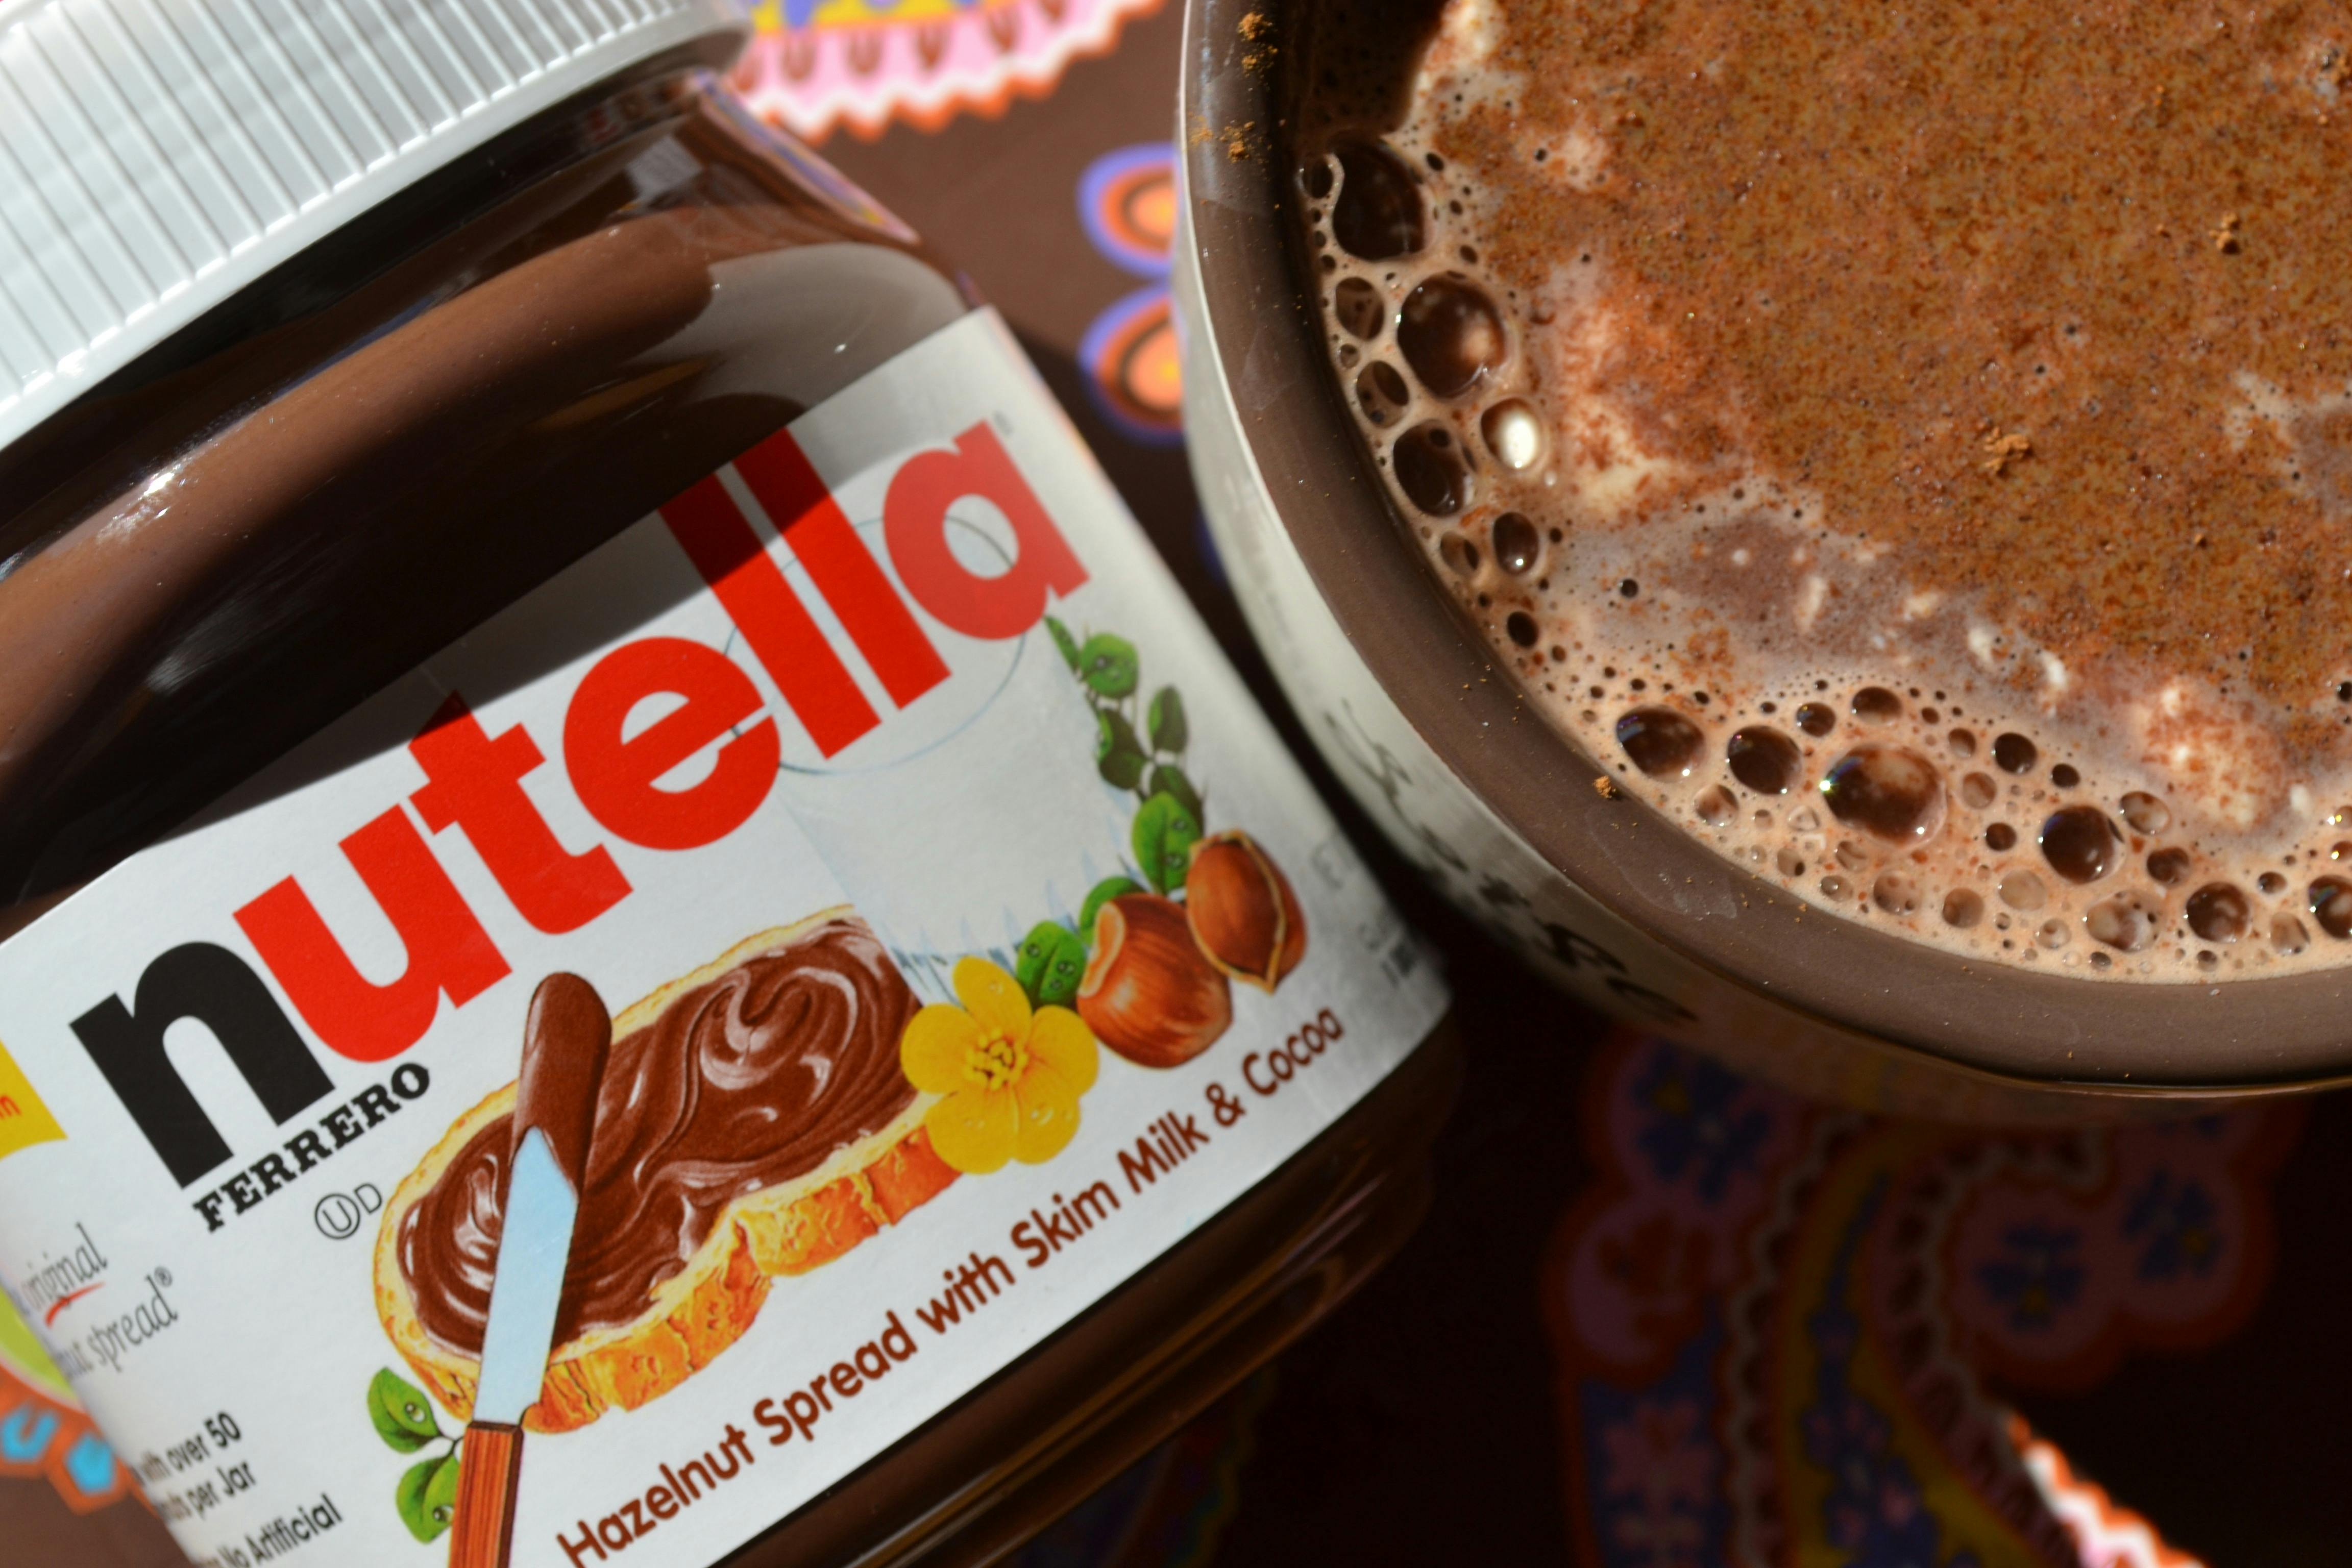 Add a dose of Nutella to your hot chocolate.